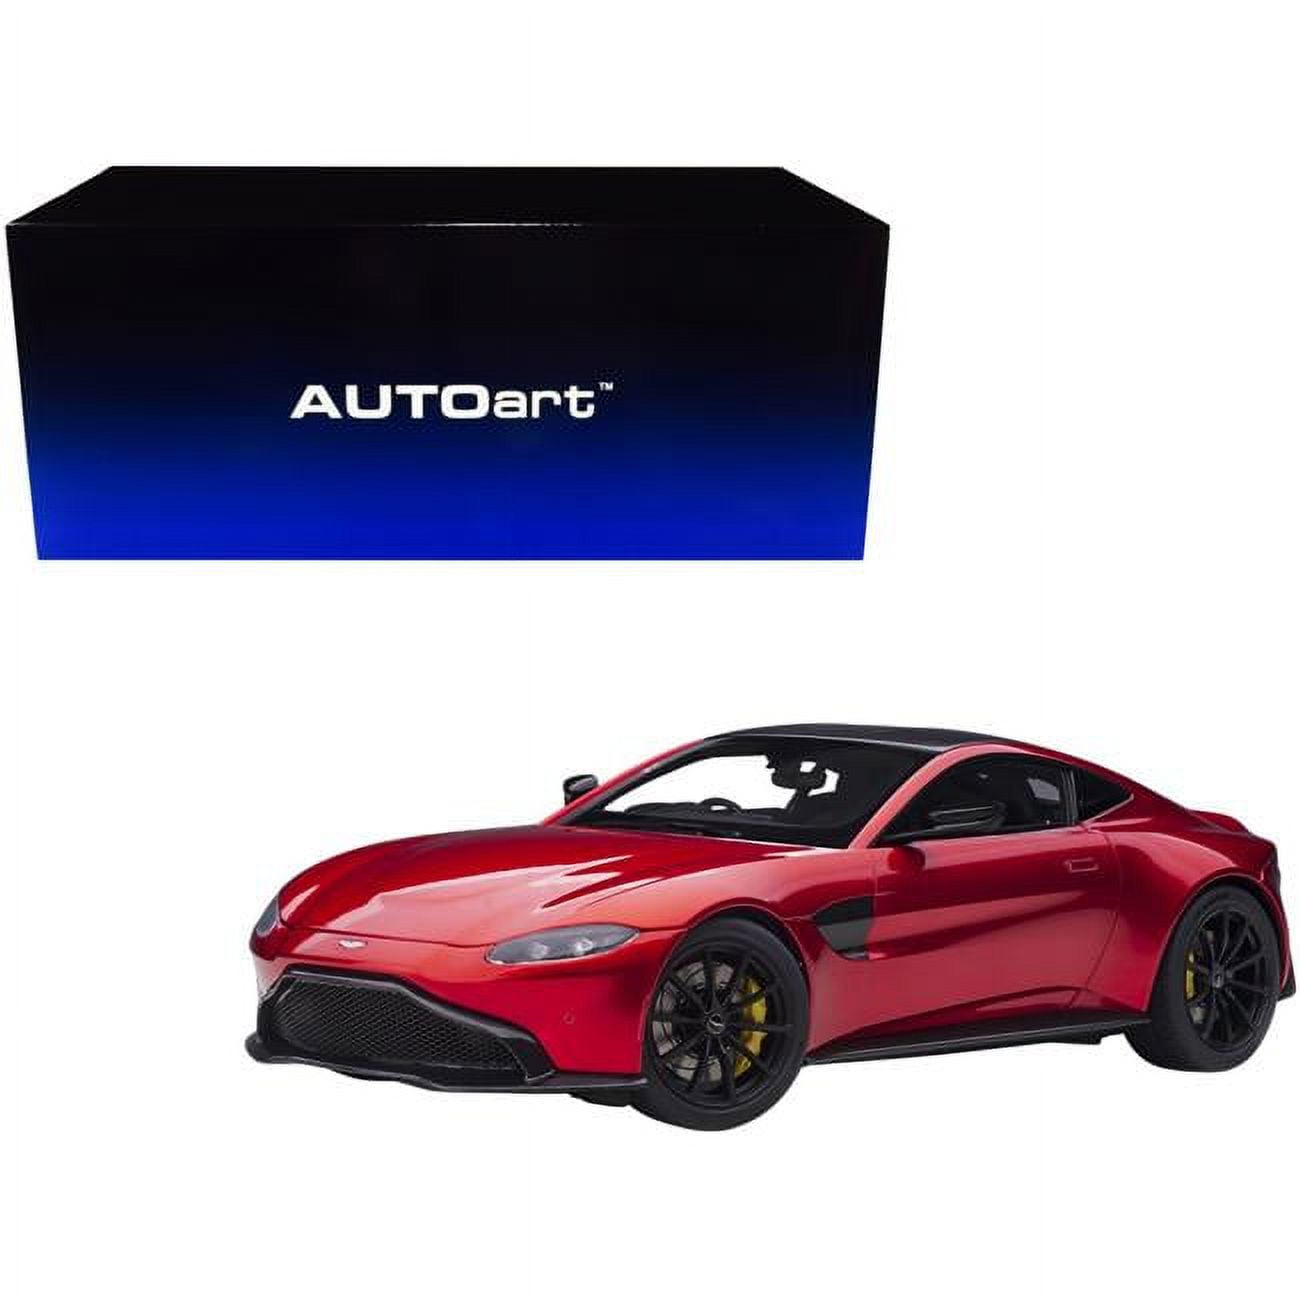 Picture of Autoart 70277 Hyper Red Metallic with Carbon Top 1 by 18 Scale Model Car for 2019 Aston Martin Vantage RHD